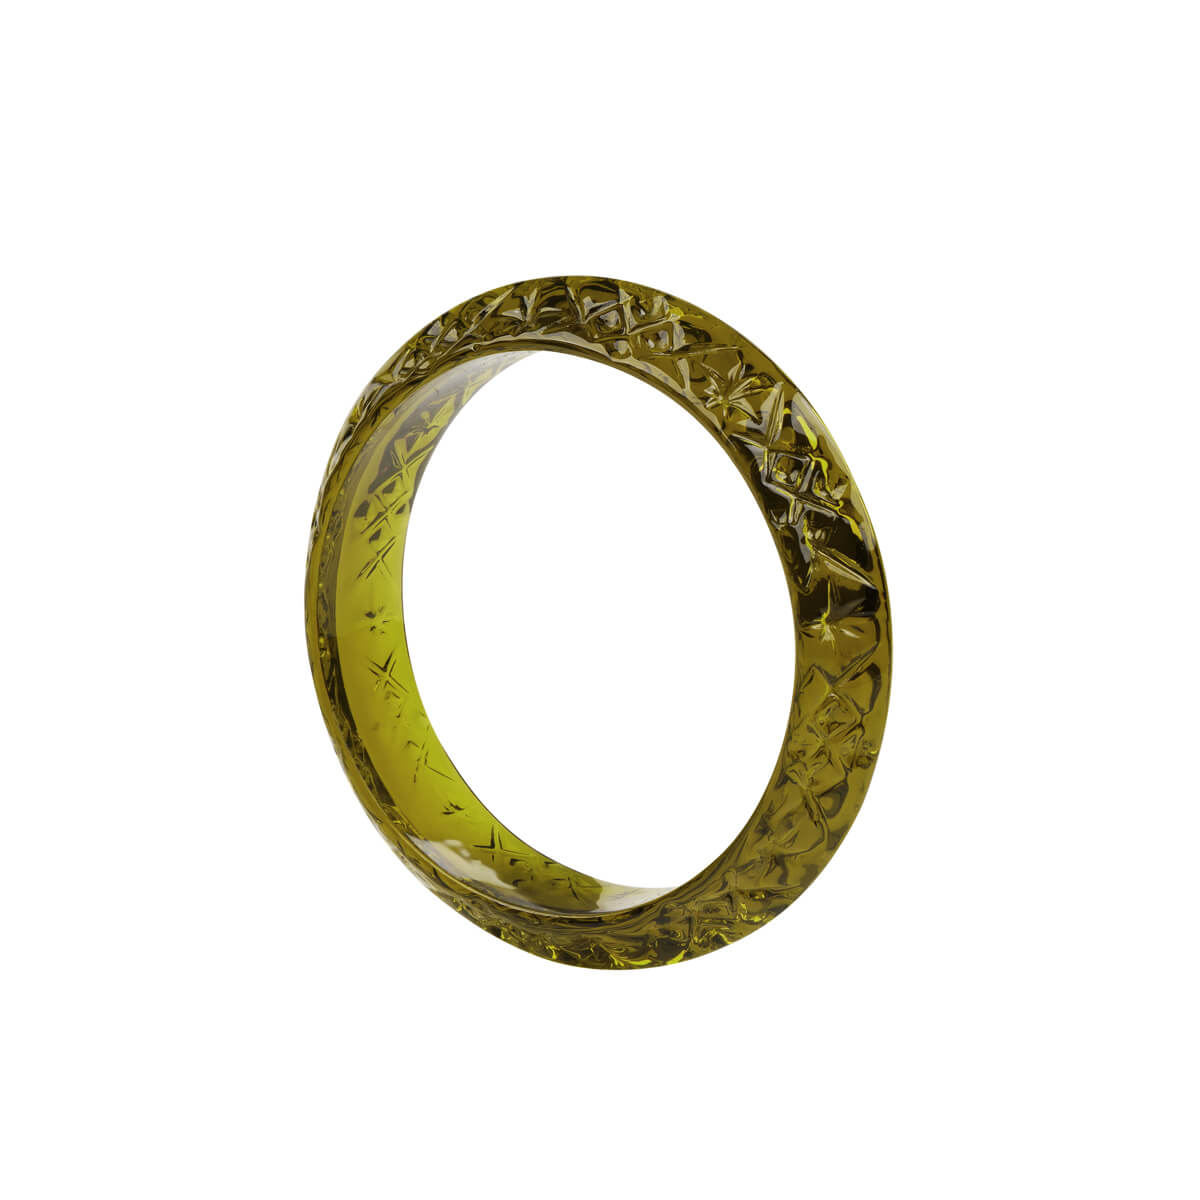 NEW IN Round Edged Bangle Olive